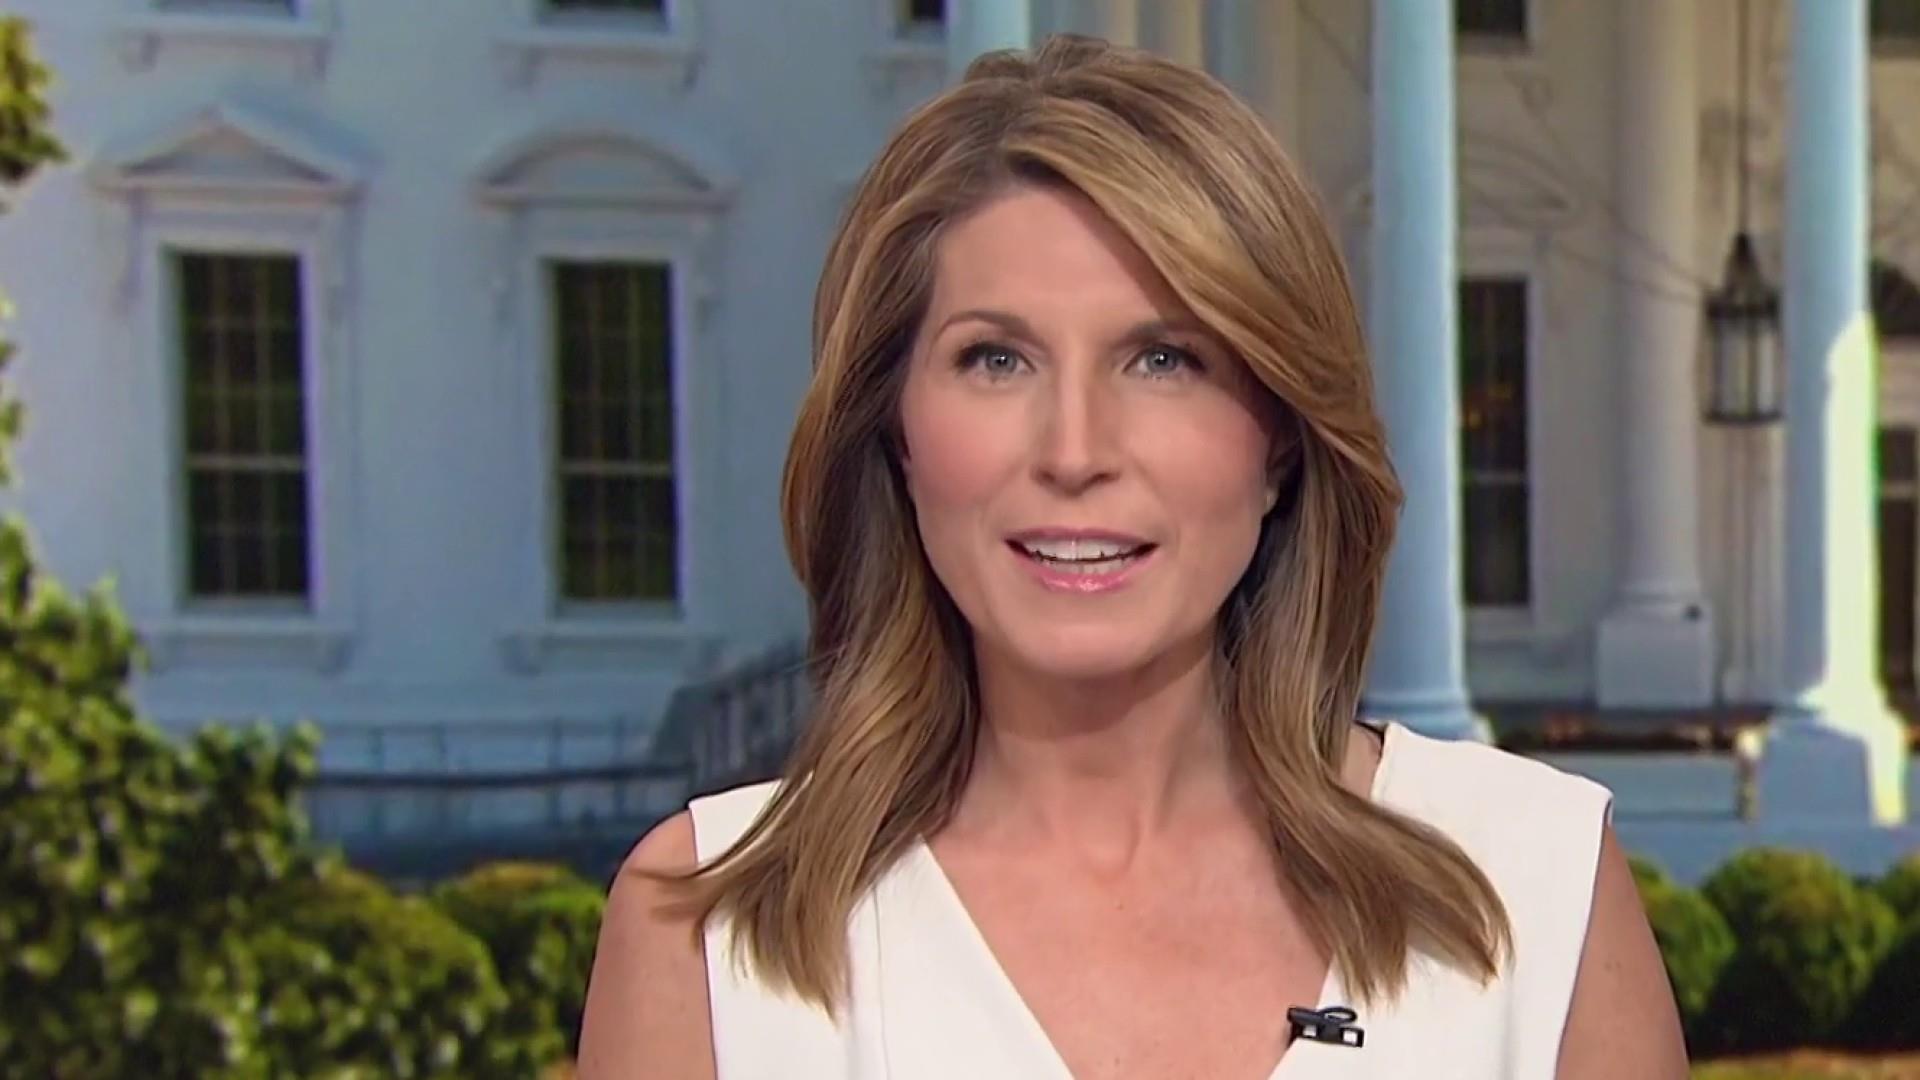 Nicole wallace salary msnbc - ðŸ§¡ Nicolle Wallace confirms exit from 'T...